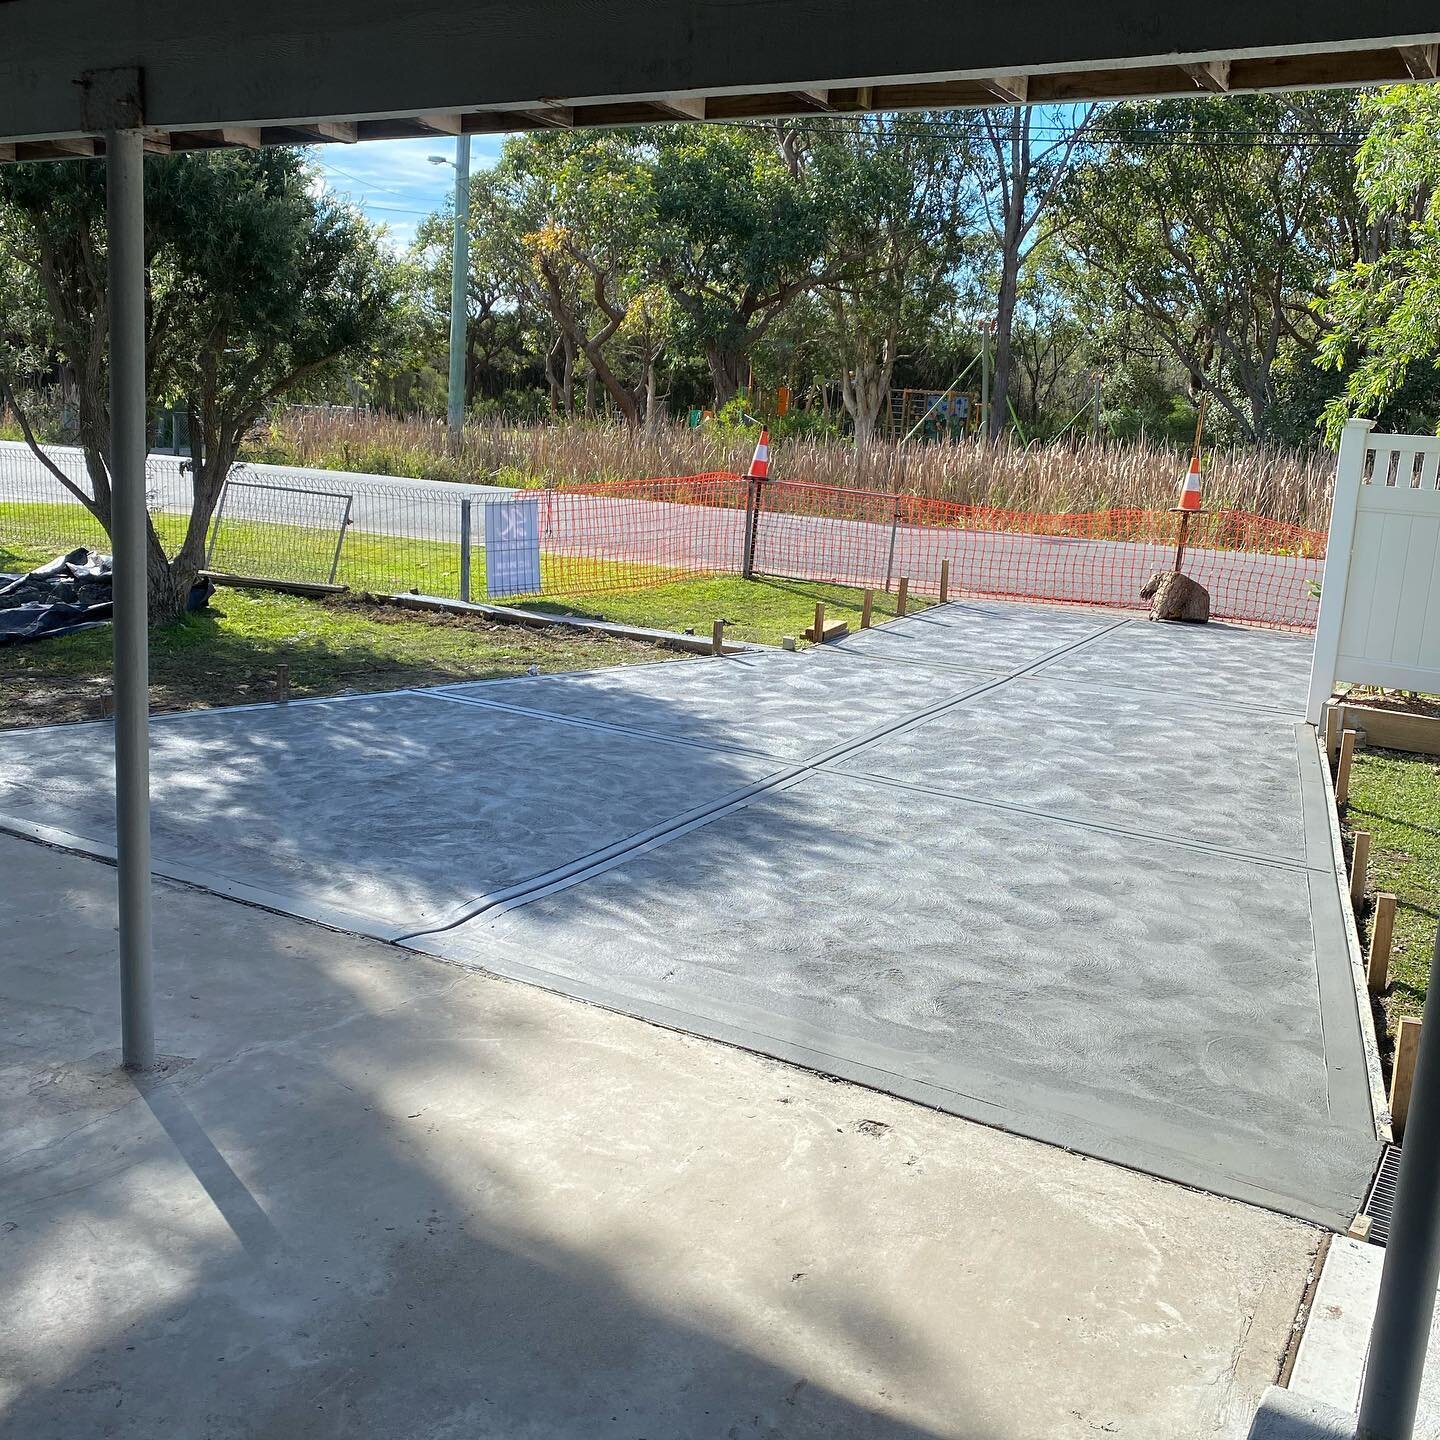 We put in a new driveway and path for my old friend to help him out. What a difference this driveway made to his property. To say his was over the moon is an understatement.
#ForrestersBeach

Let's Get Creative and Let's Get Concreting 
#driveways #p